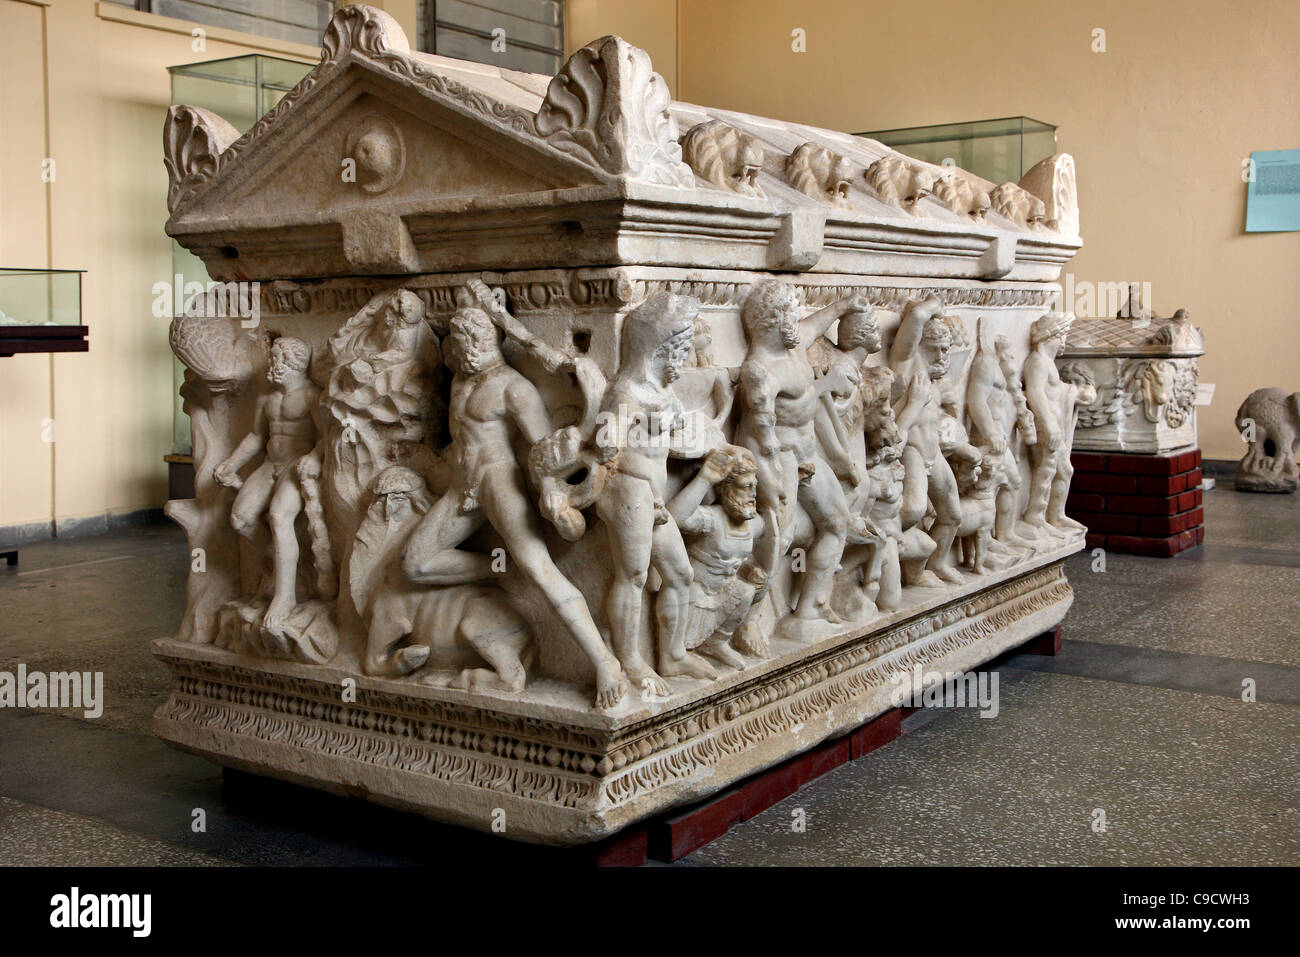 The sarcophagus depicting the 12 labors of Hercules in the archaeological museum of Kayseri, Turkey Stock Photo